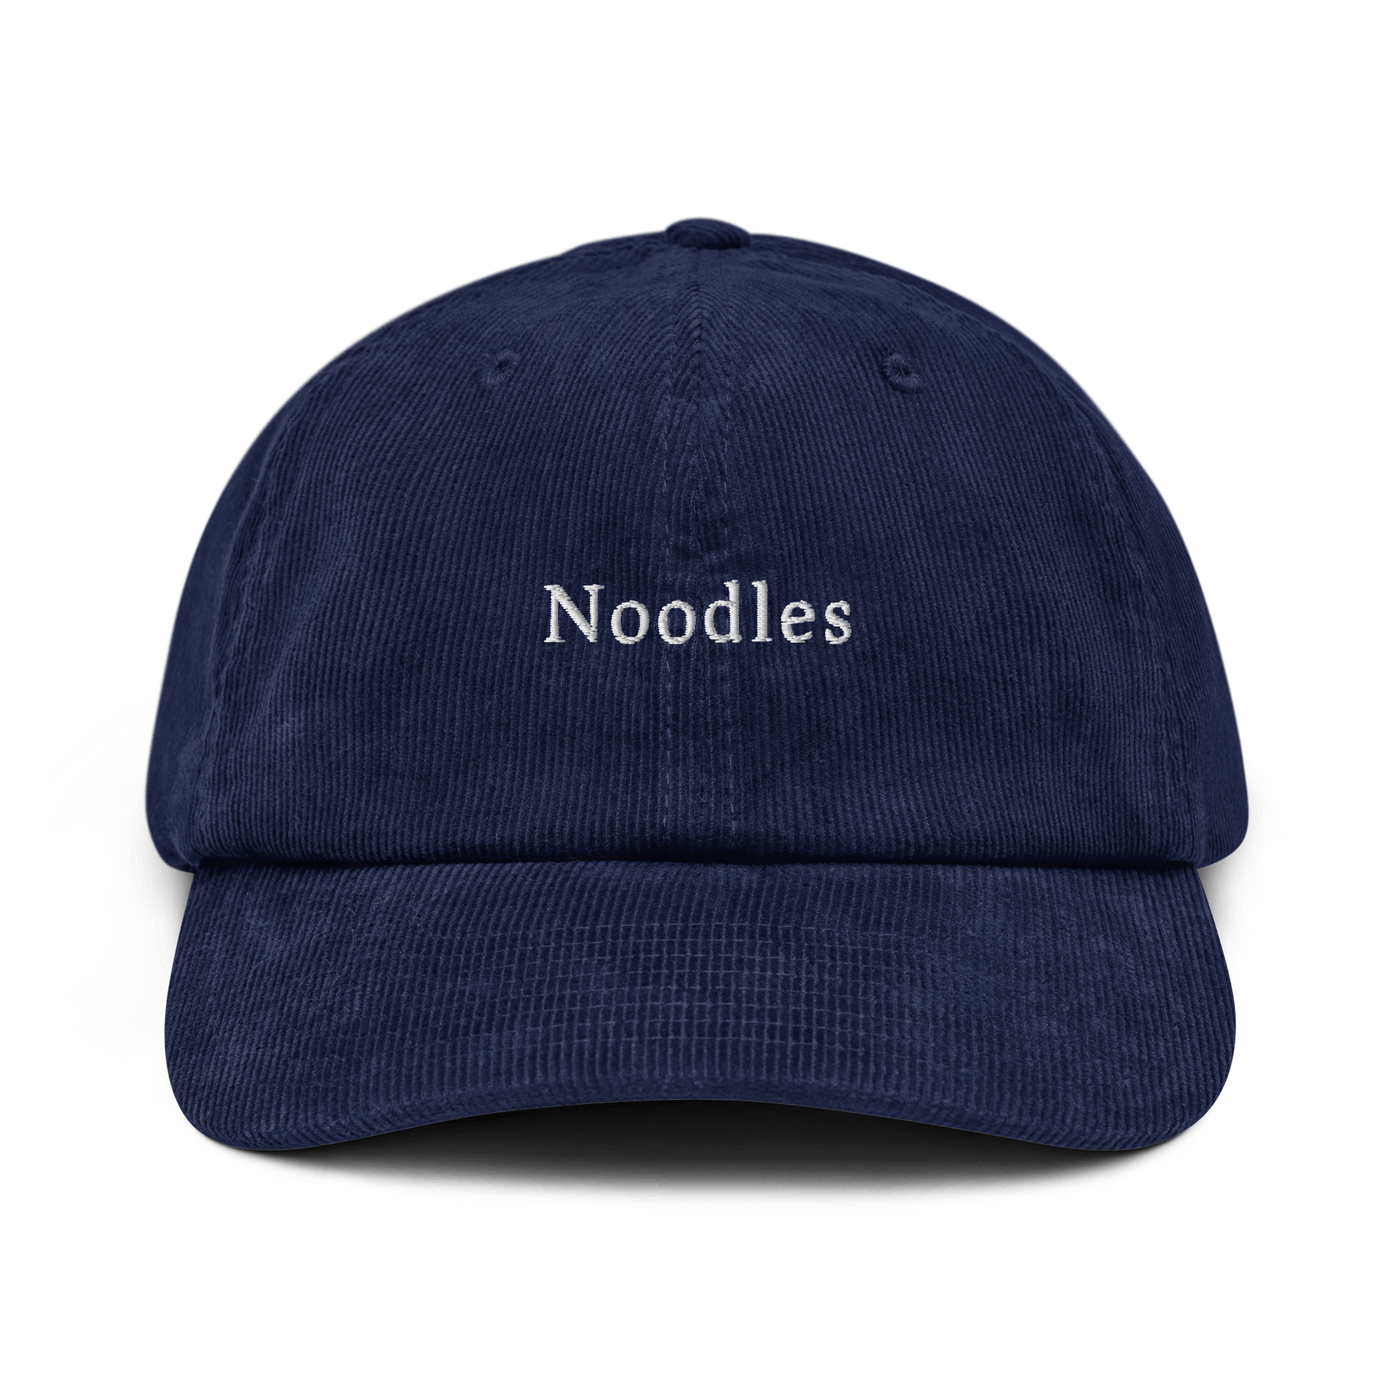 Noodles Corduroy hat - Oxford Navy - - Just Another Cap Store